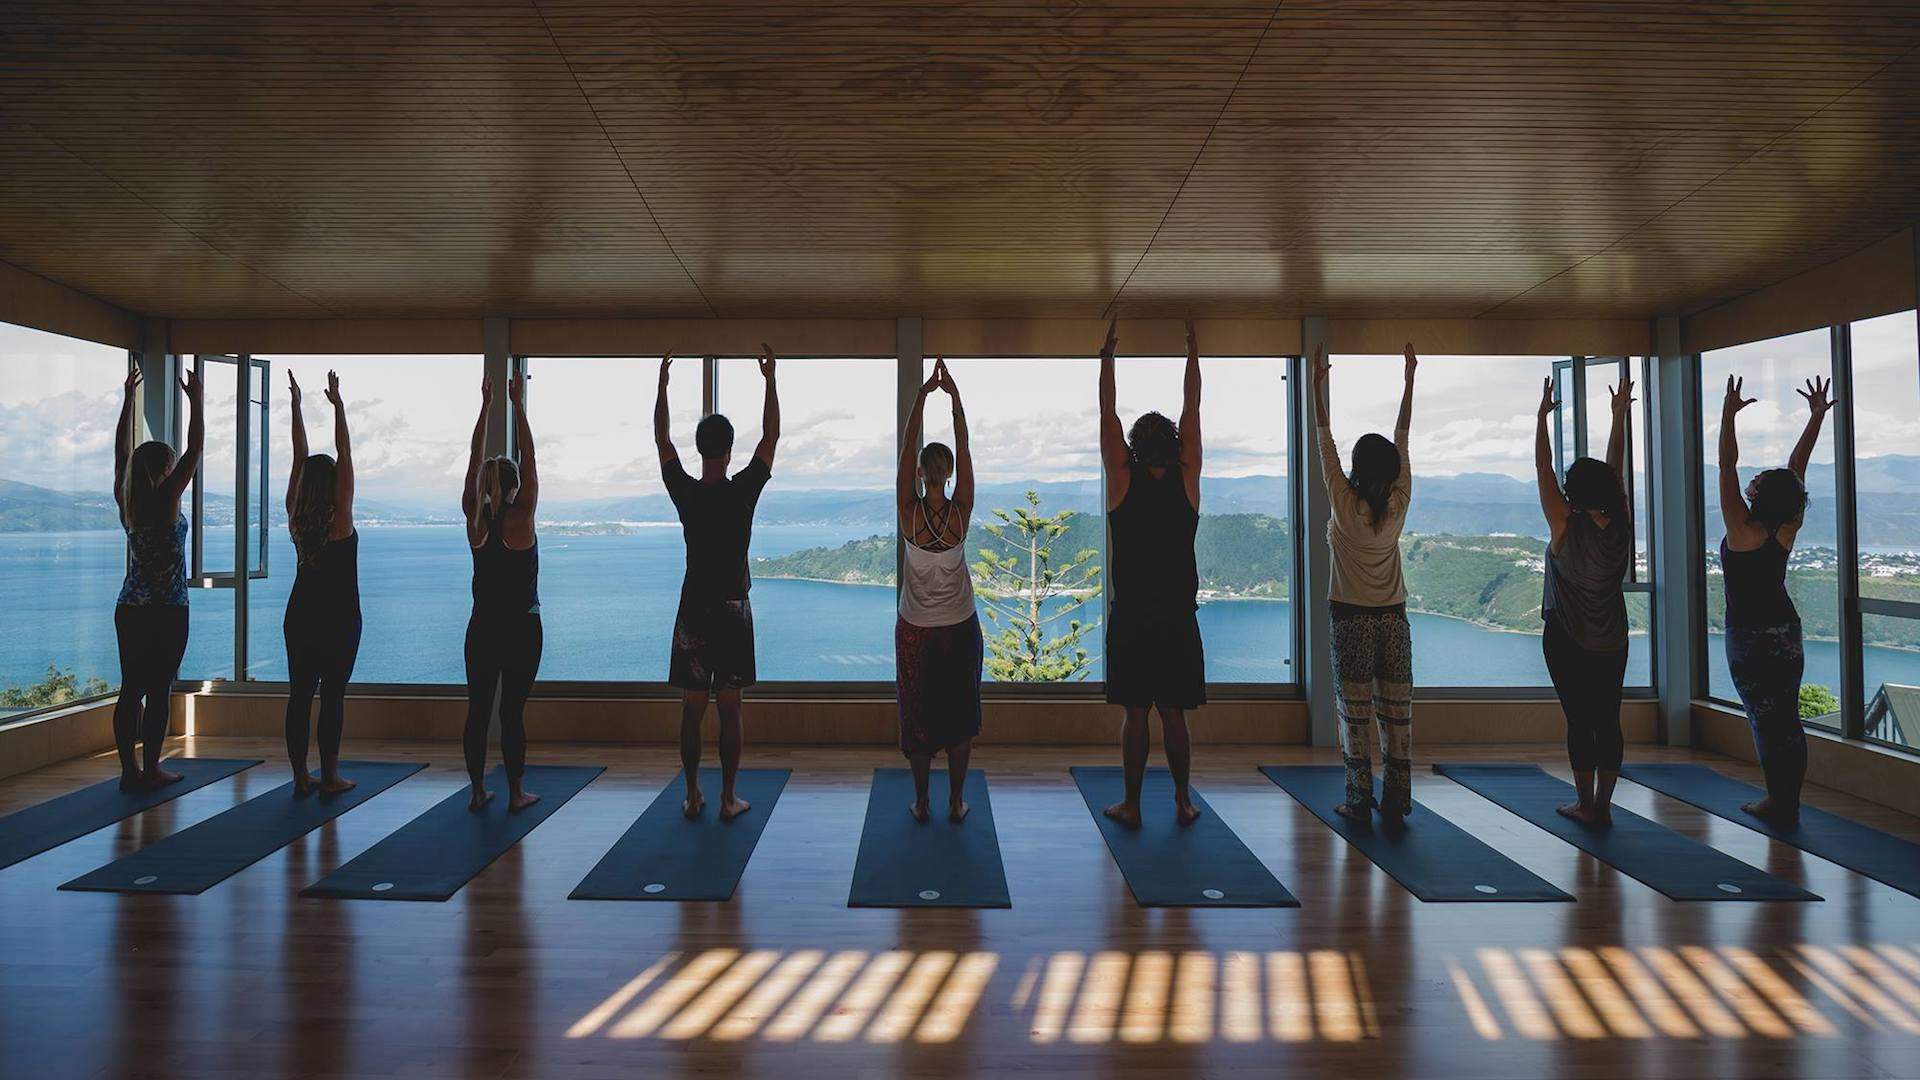 You'll Find This Breathtaking New Yoga Studio at the Top of Mount Victoria